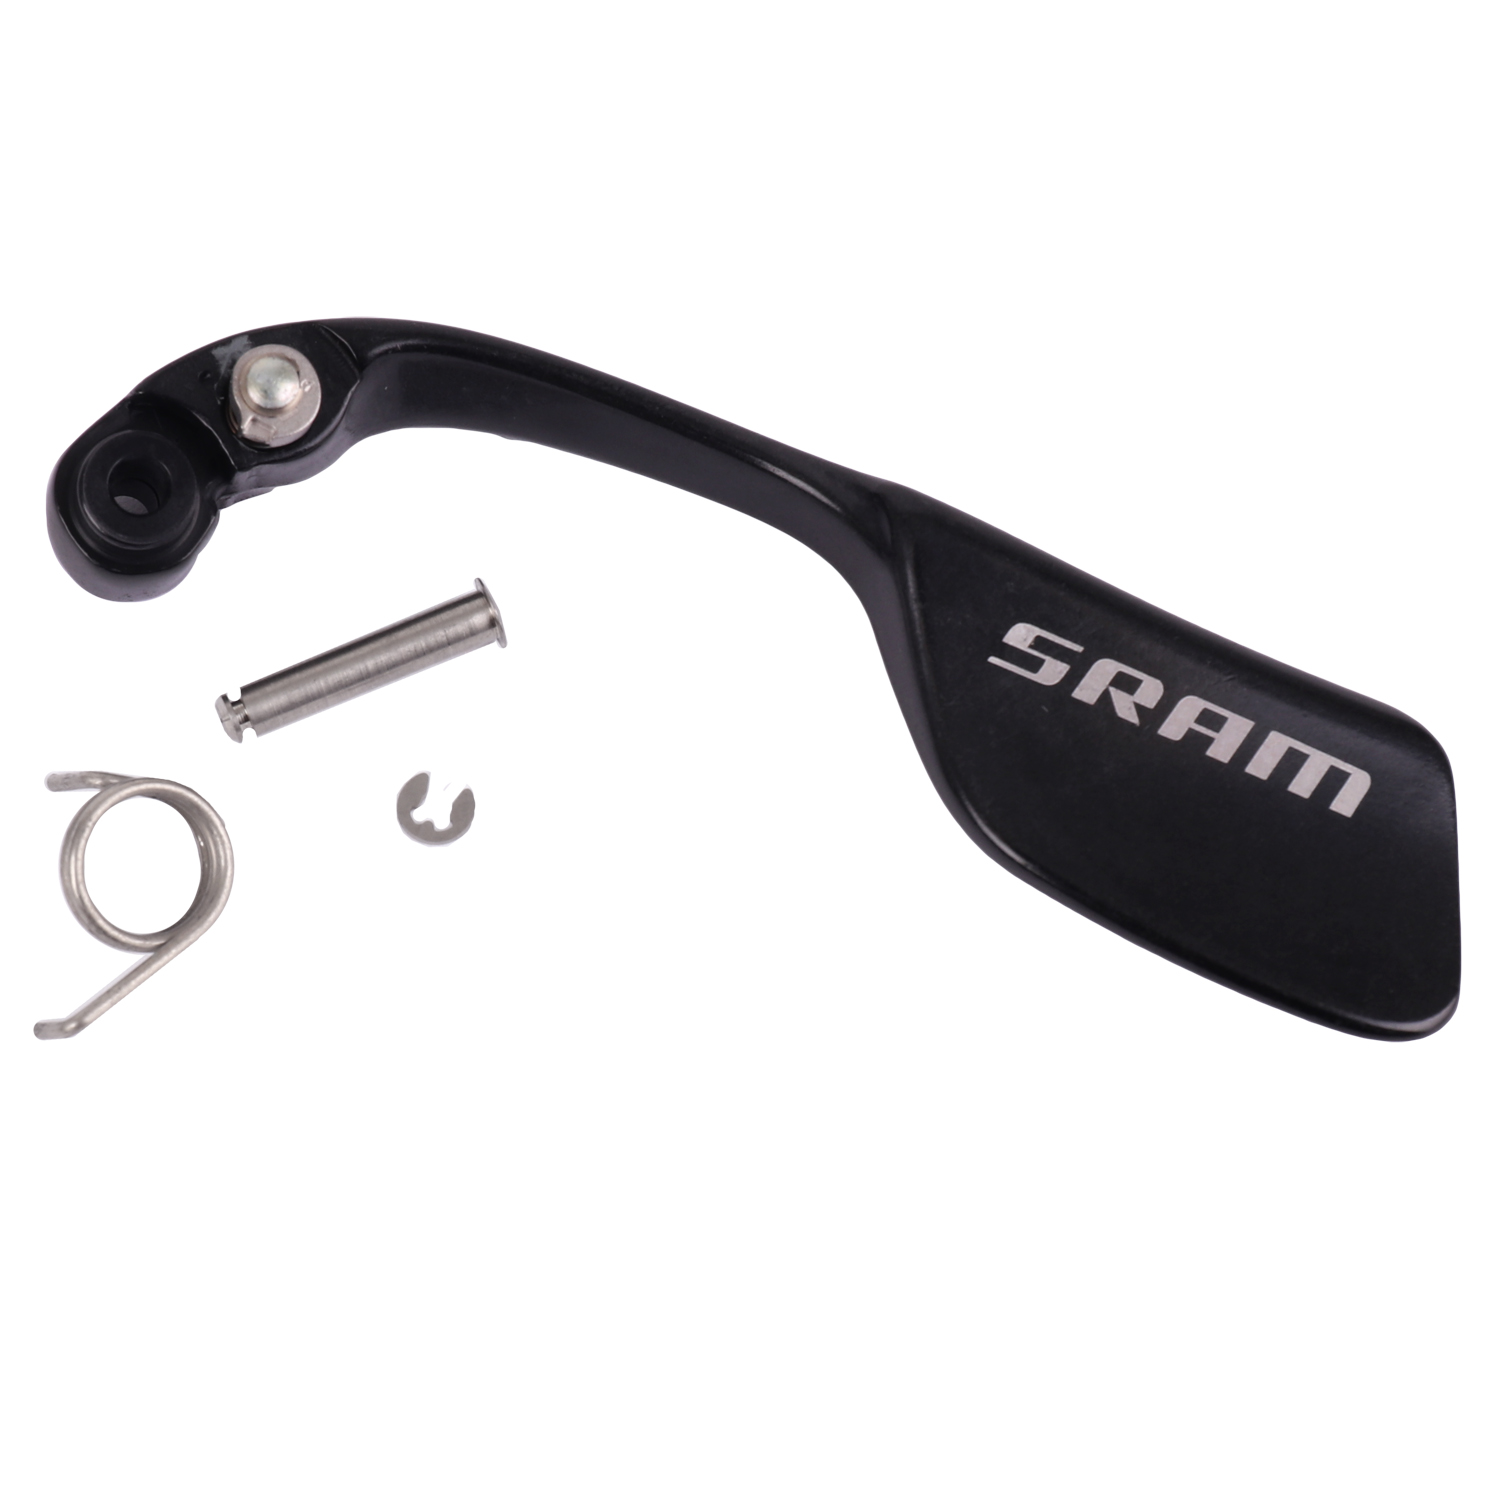 Image of SRAM APEX/RIVAL Shift Lever Assembly Kit - left - Model Year 2009-2011 - 11.7015.052.040